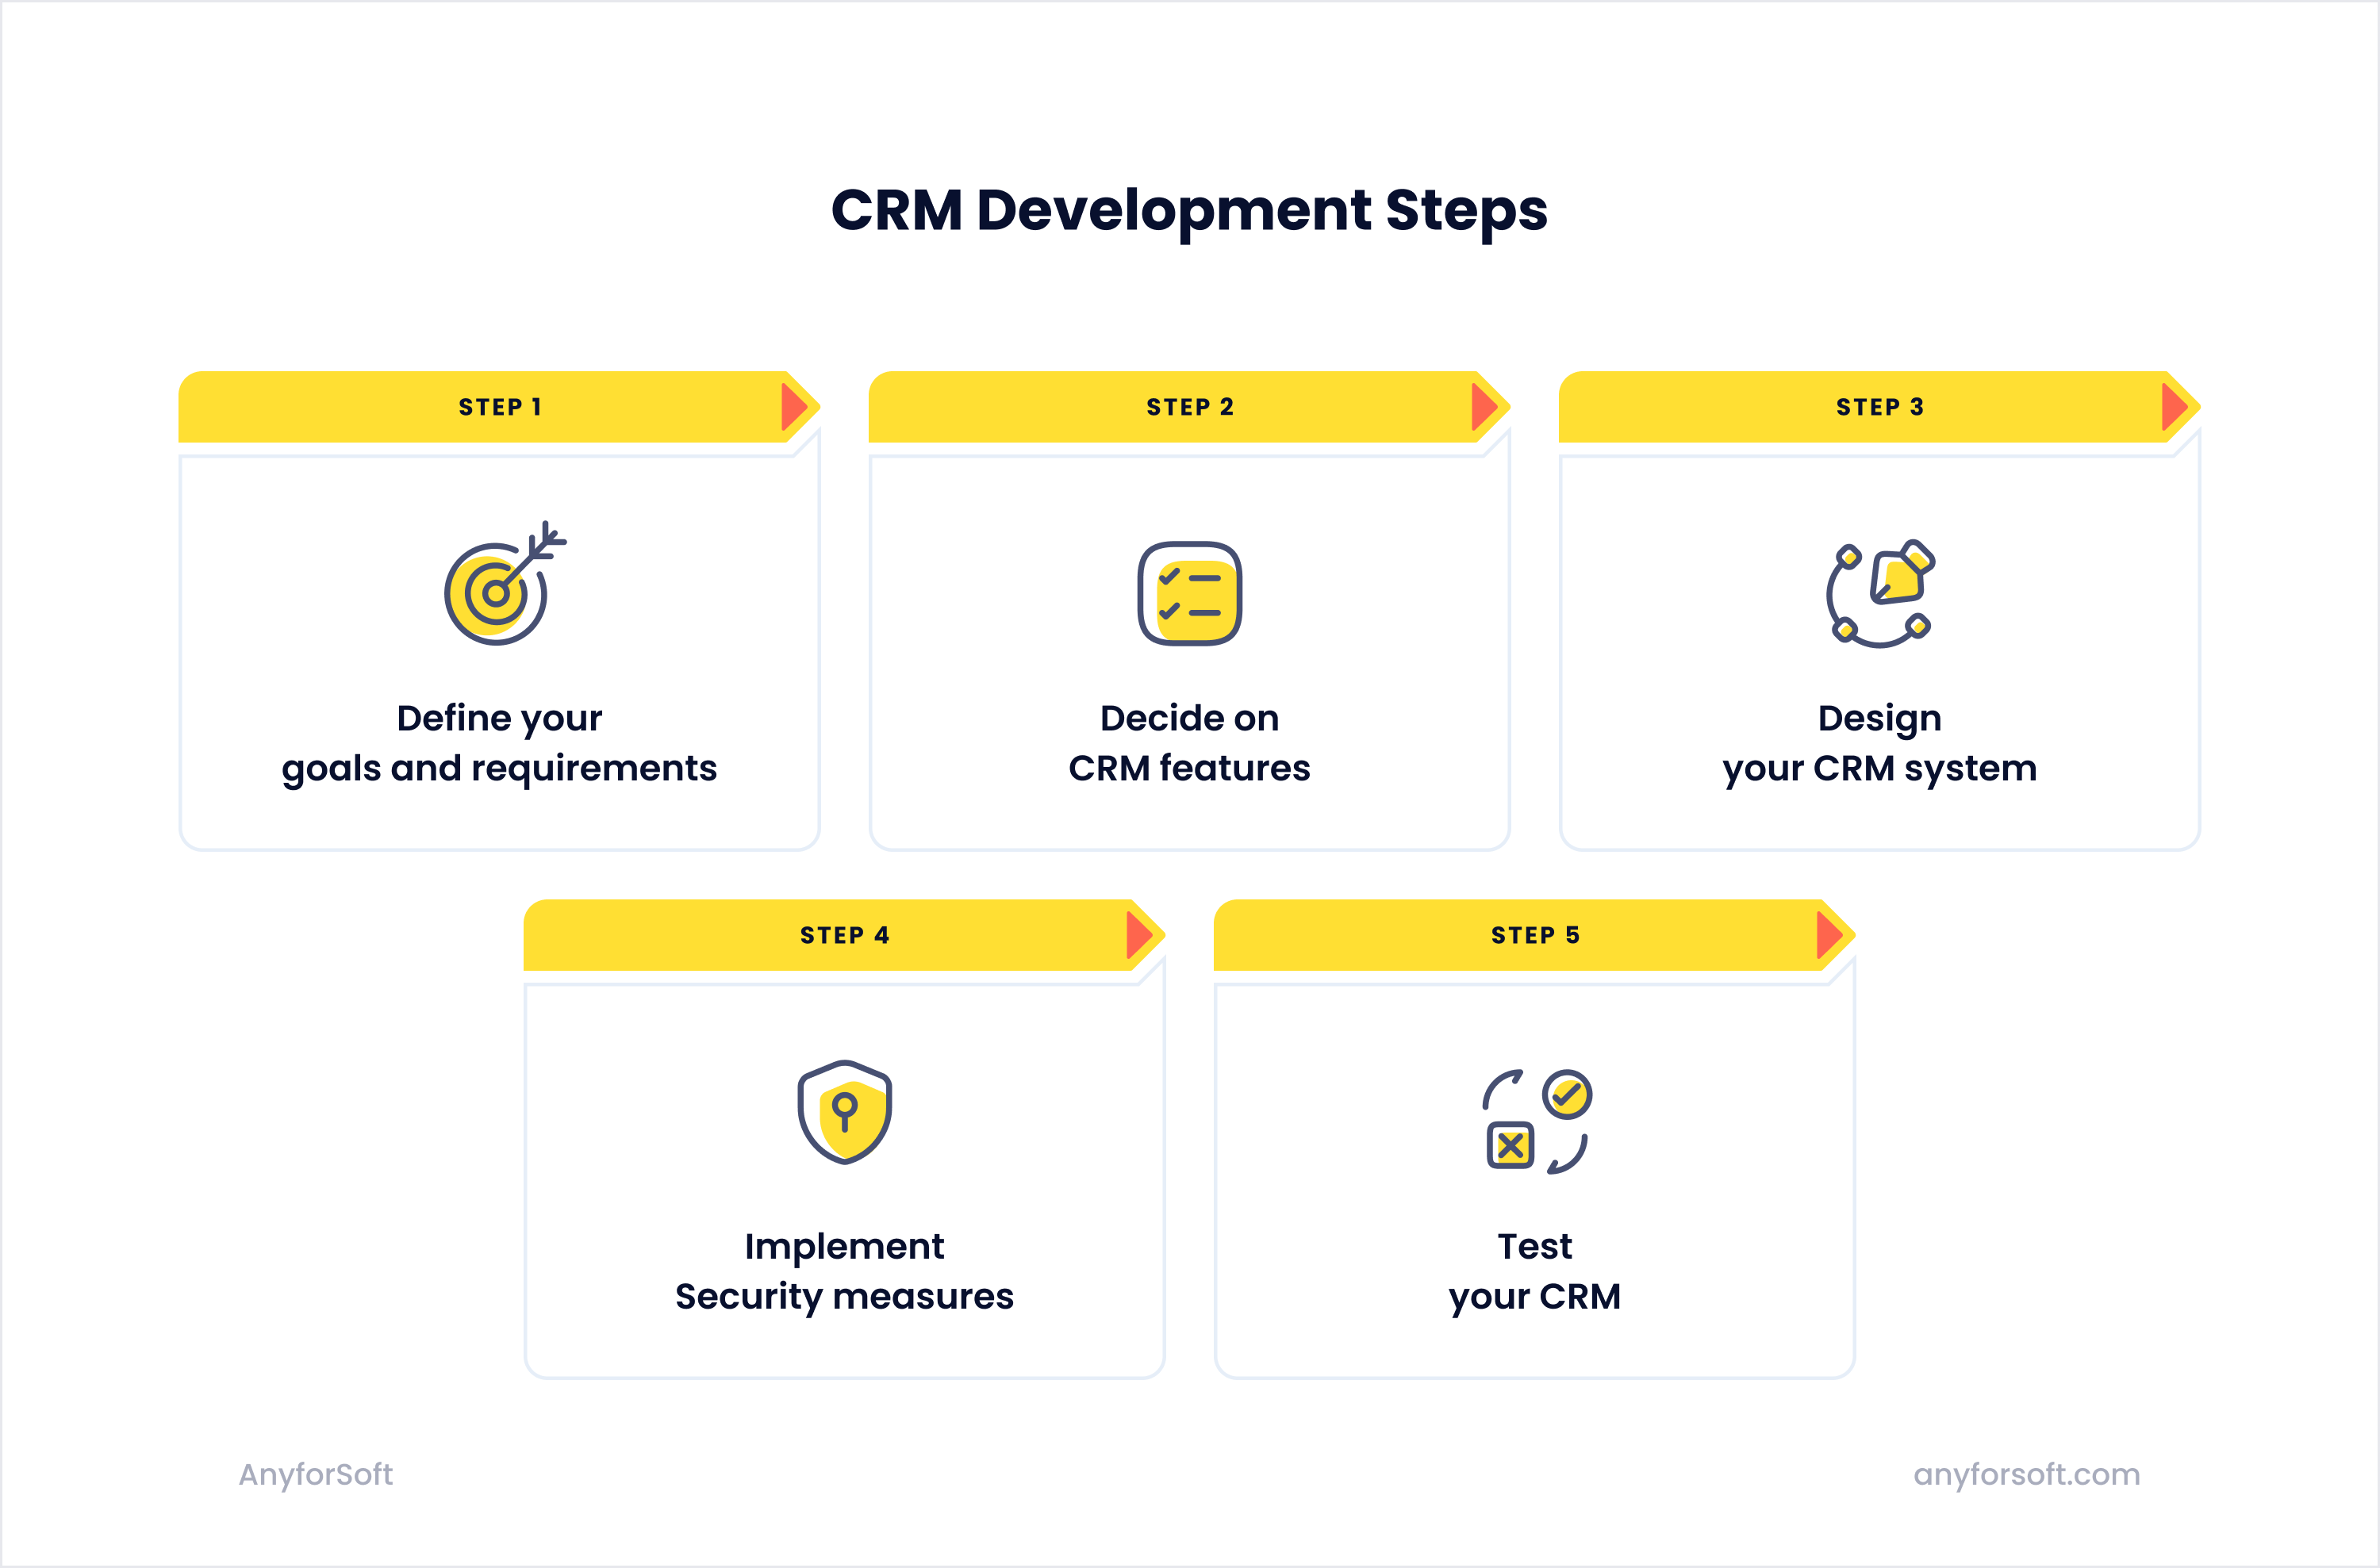 How to Build a CRM: A Step-by-Step Guide